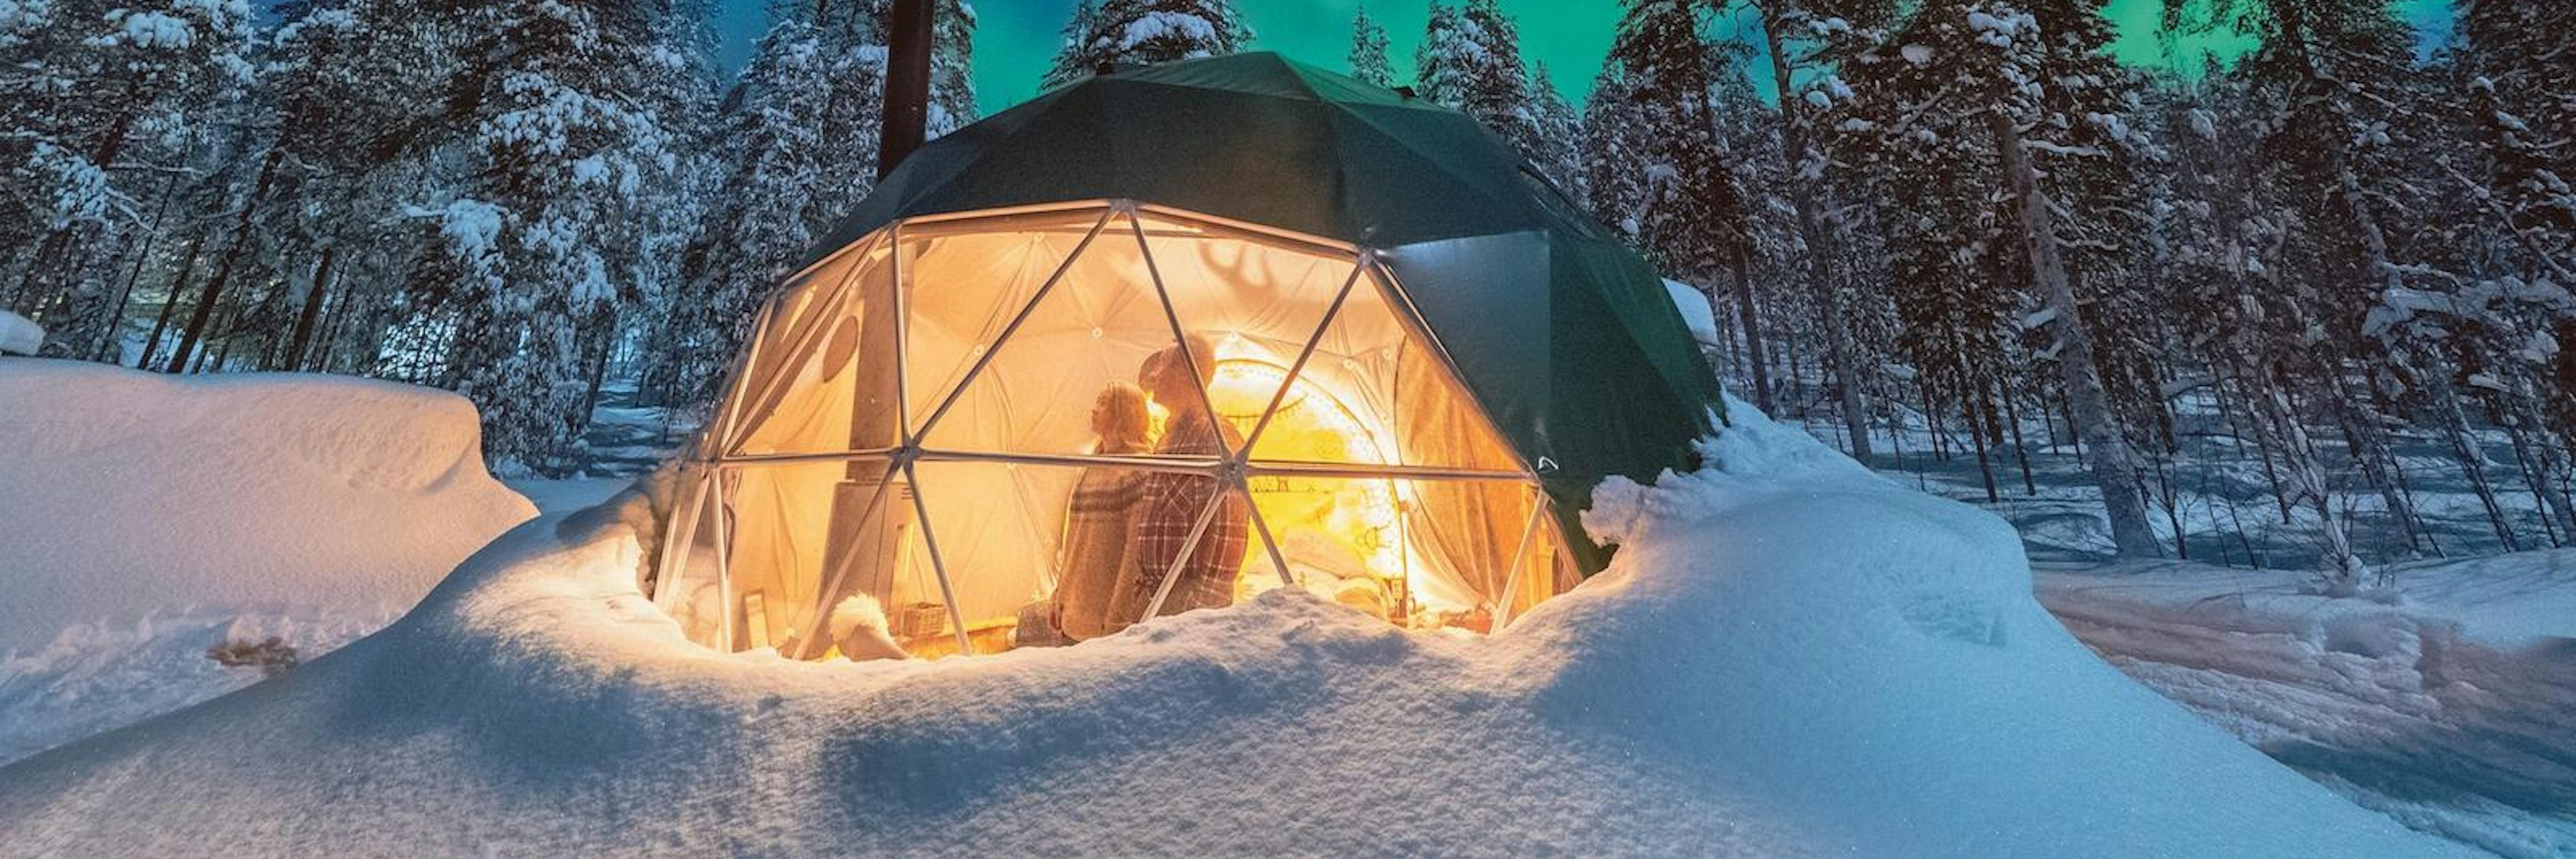 Picture of a tent in Finland with northern lights showing.